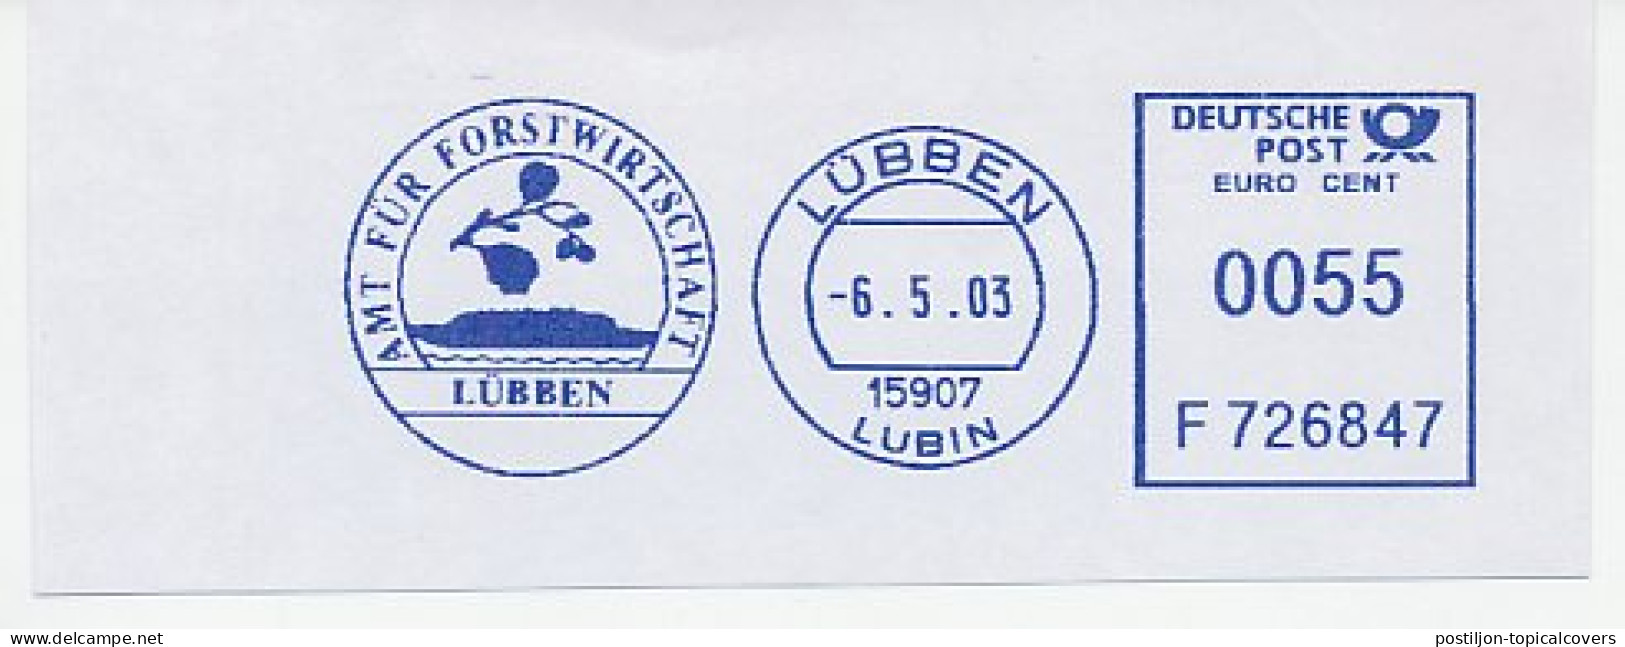 Meter Cut Germany 2003 Forestry - Lubben - Arbres